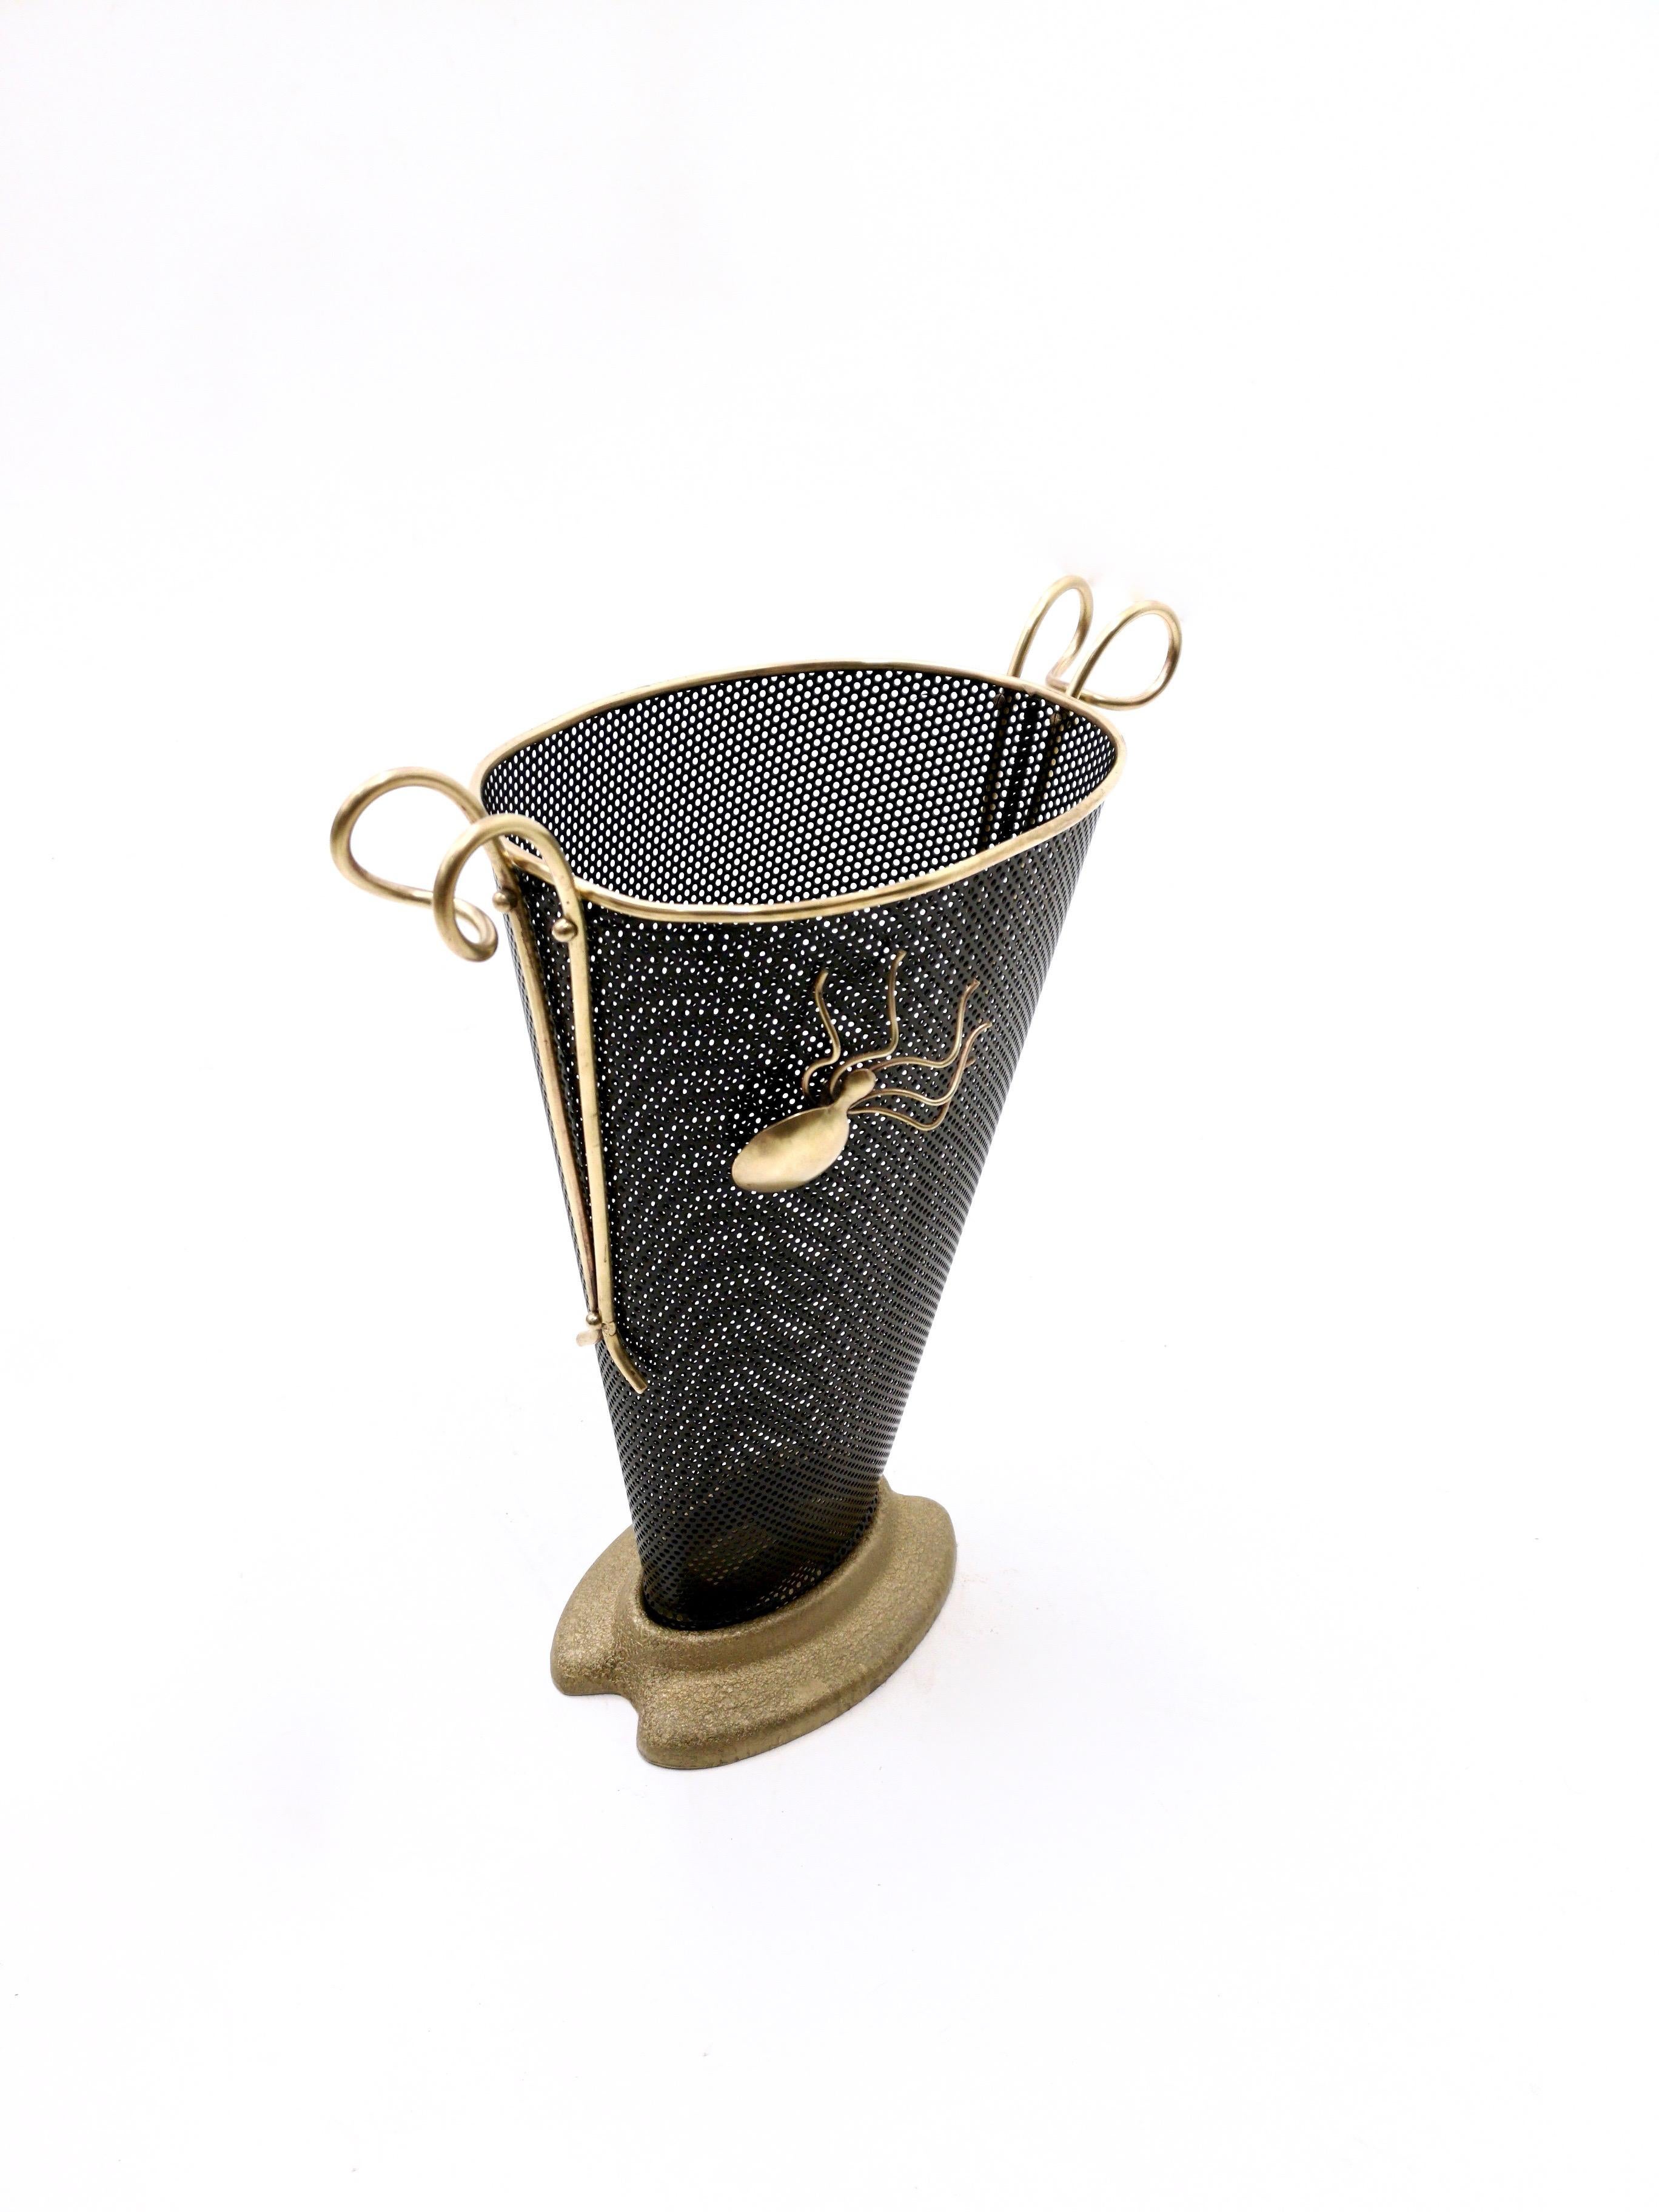 Mid-20th Century Vintage Black Varnished Metal Umbrella Stand with a Brass Spider, Italy